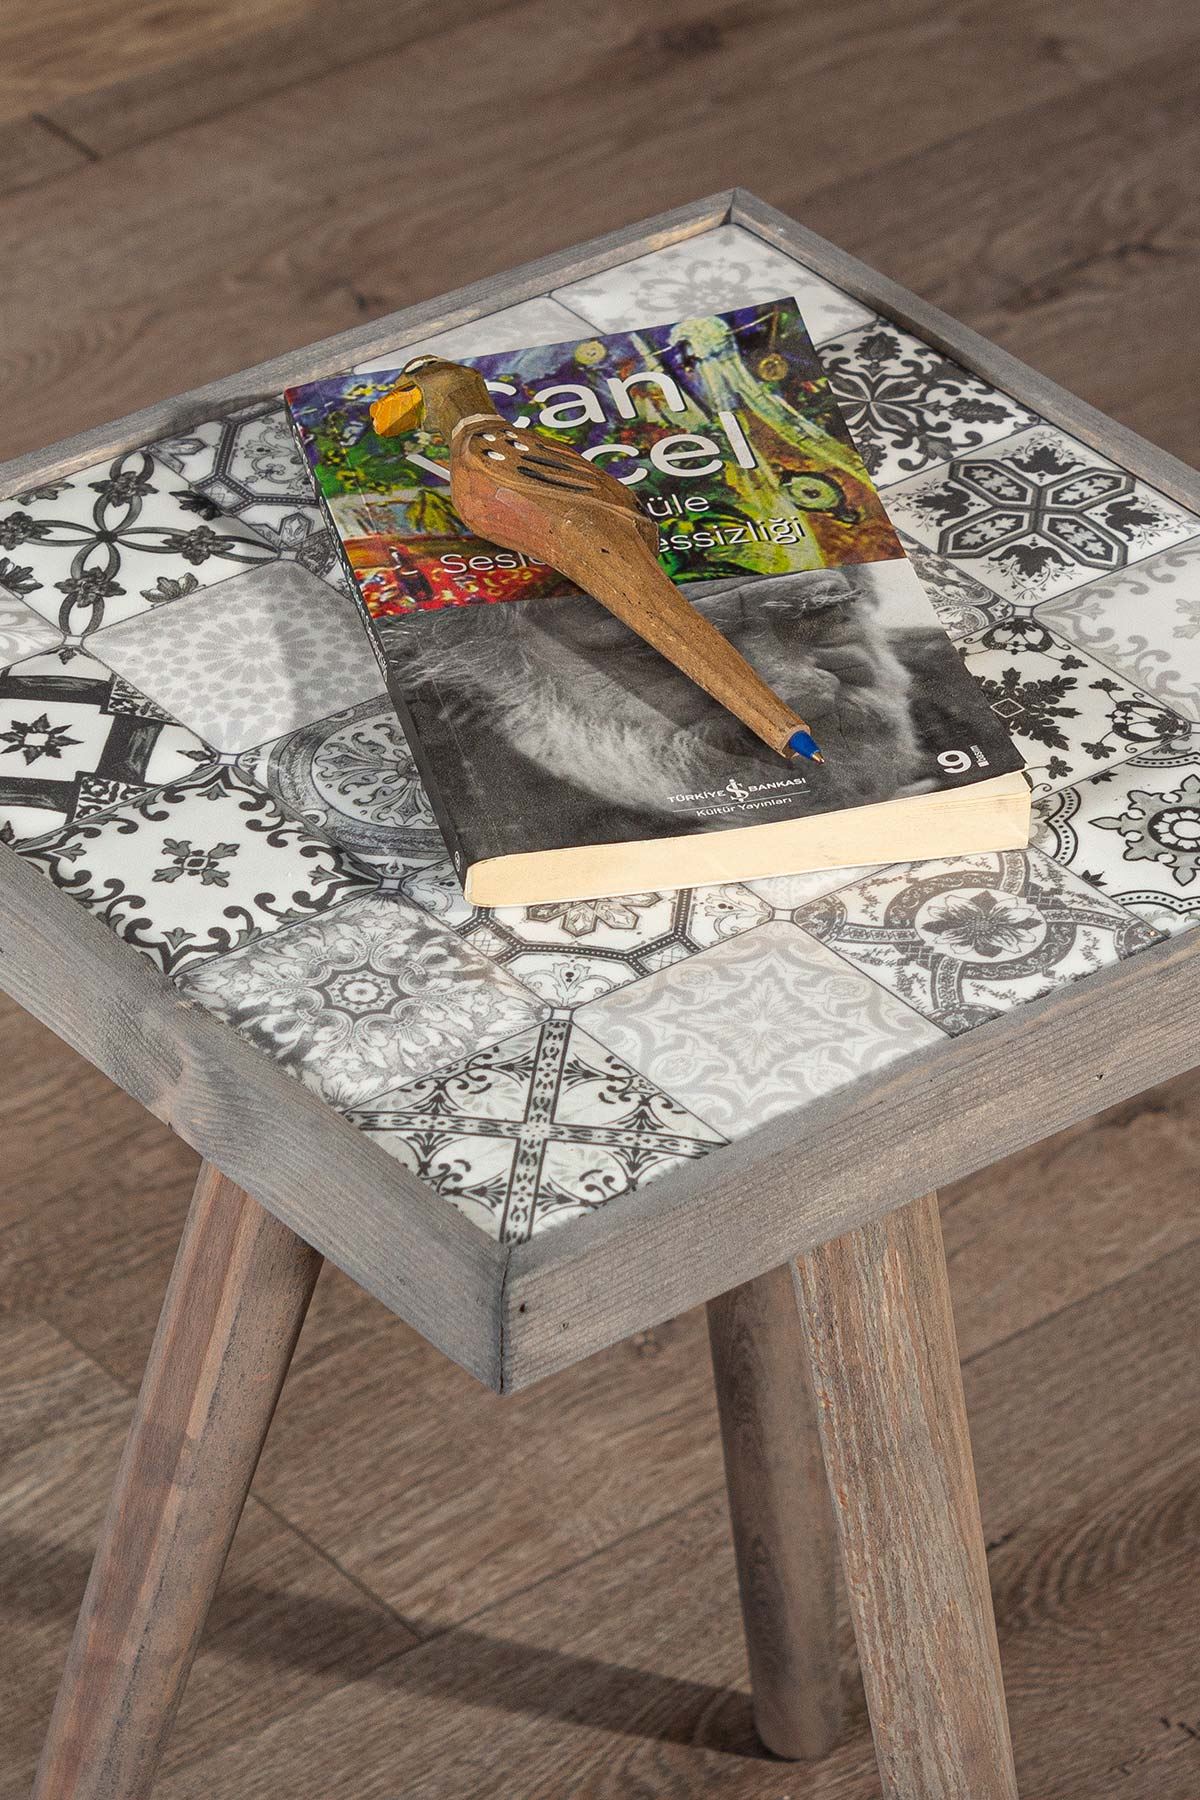 Bofigo Wooden Tile Center Table Wooden Solid Wood Table 32x32 Cm Grey